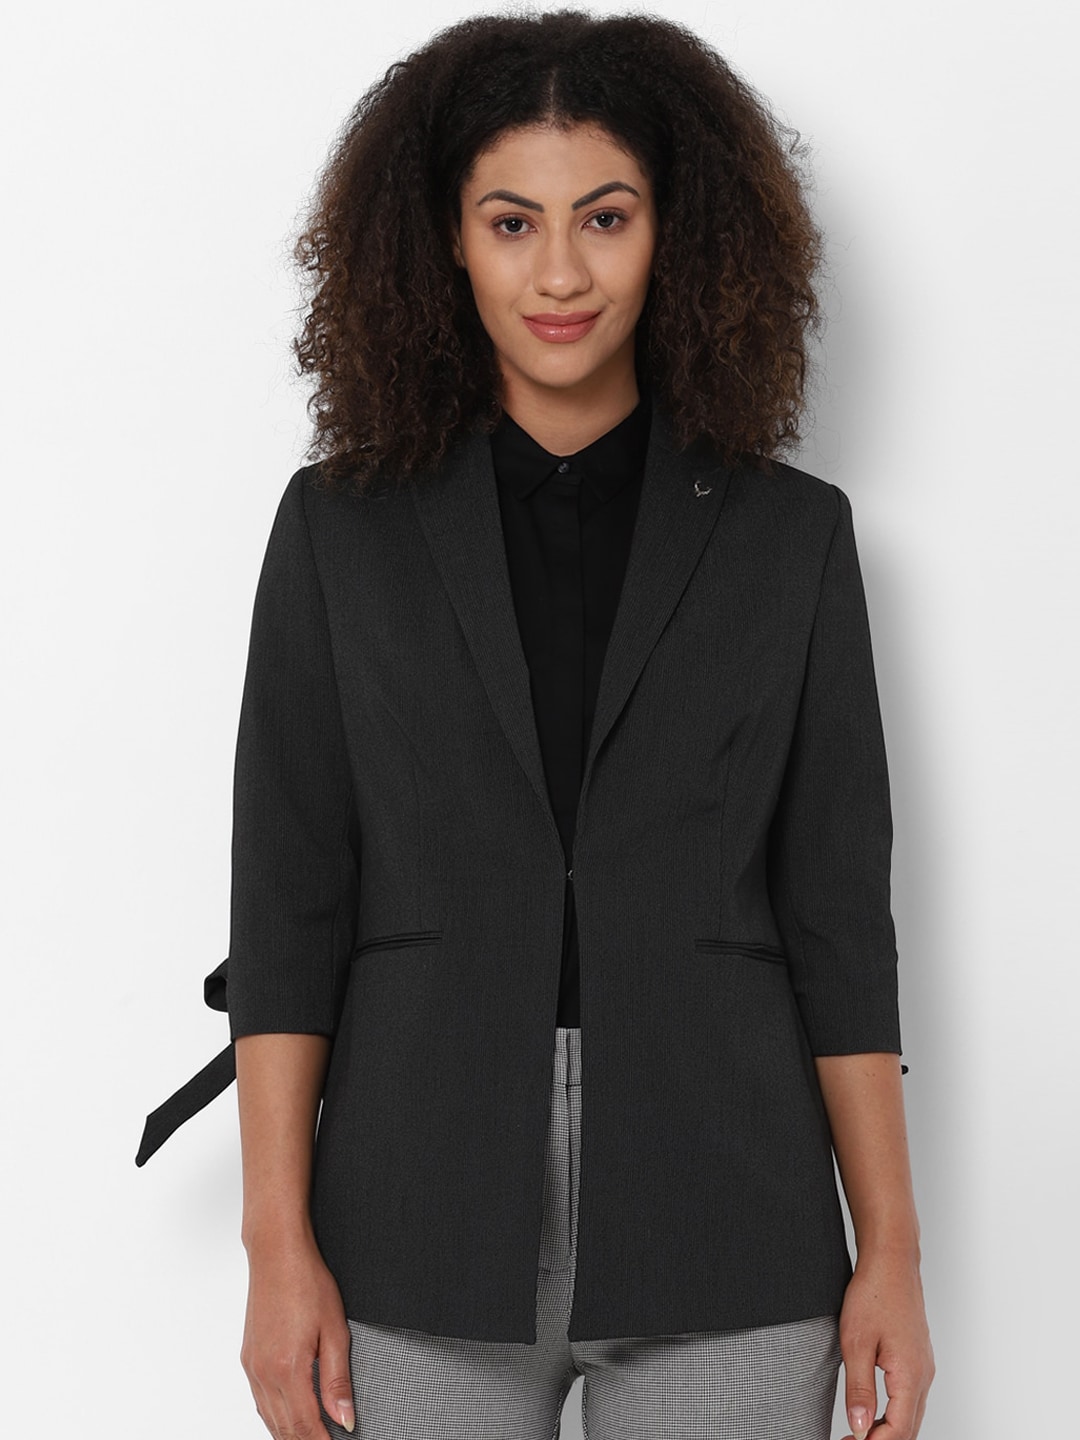 Allen Solly Woman Grey Textured Single-Breasted Formal Blazer Price in India